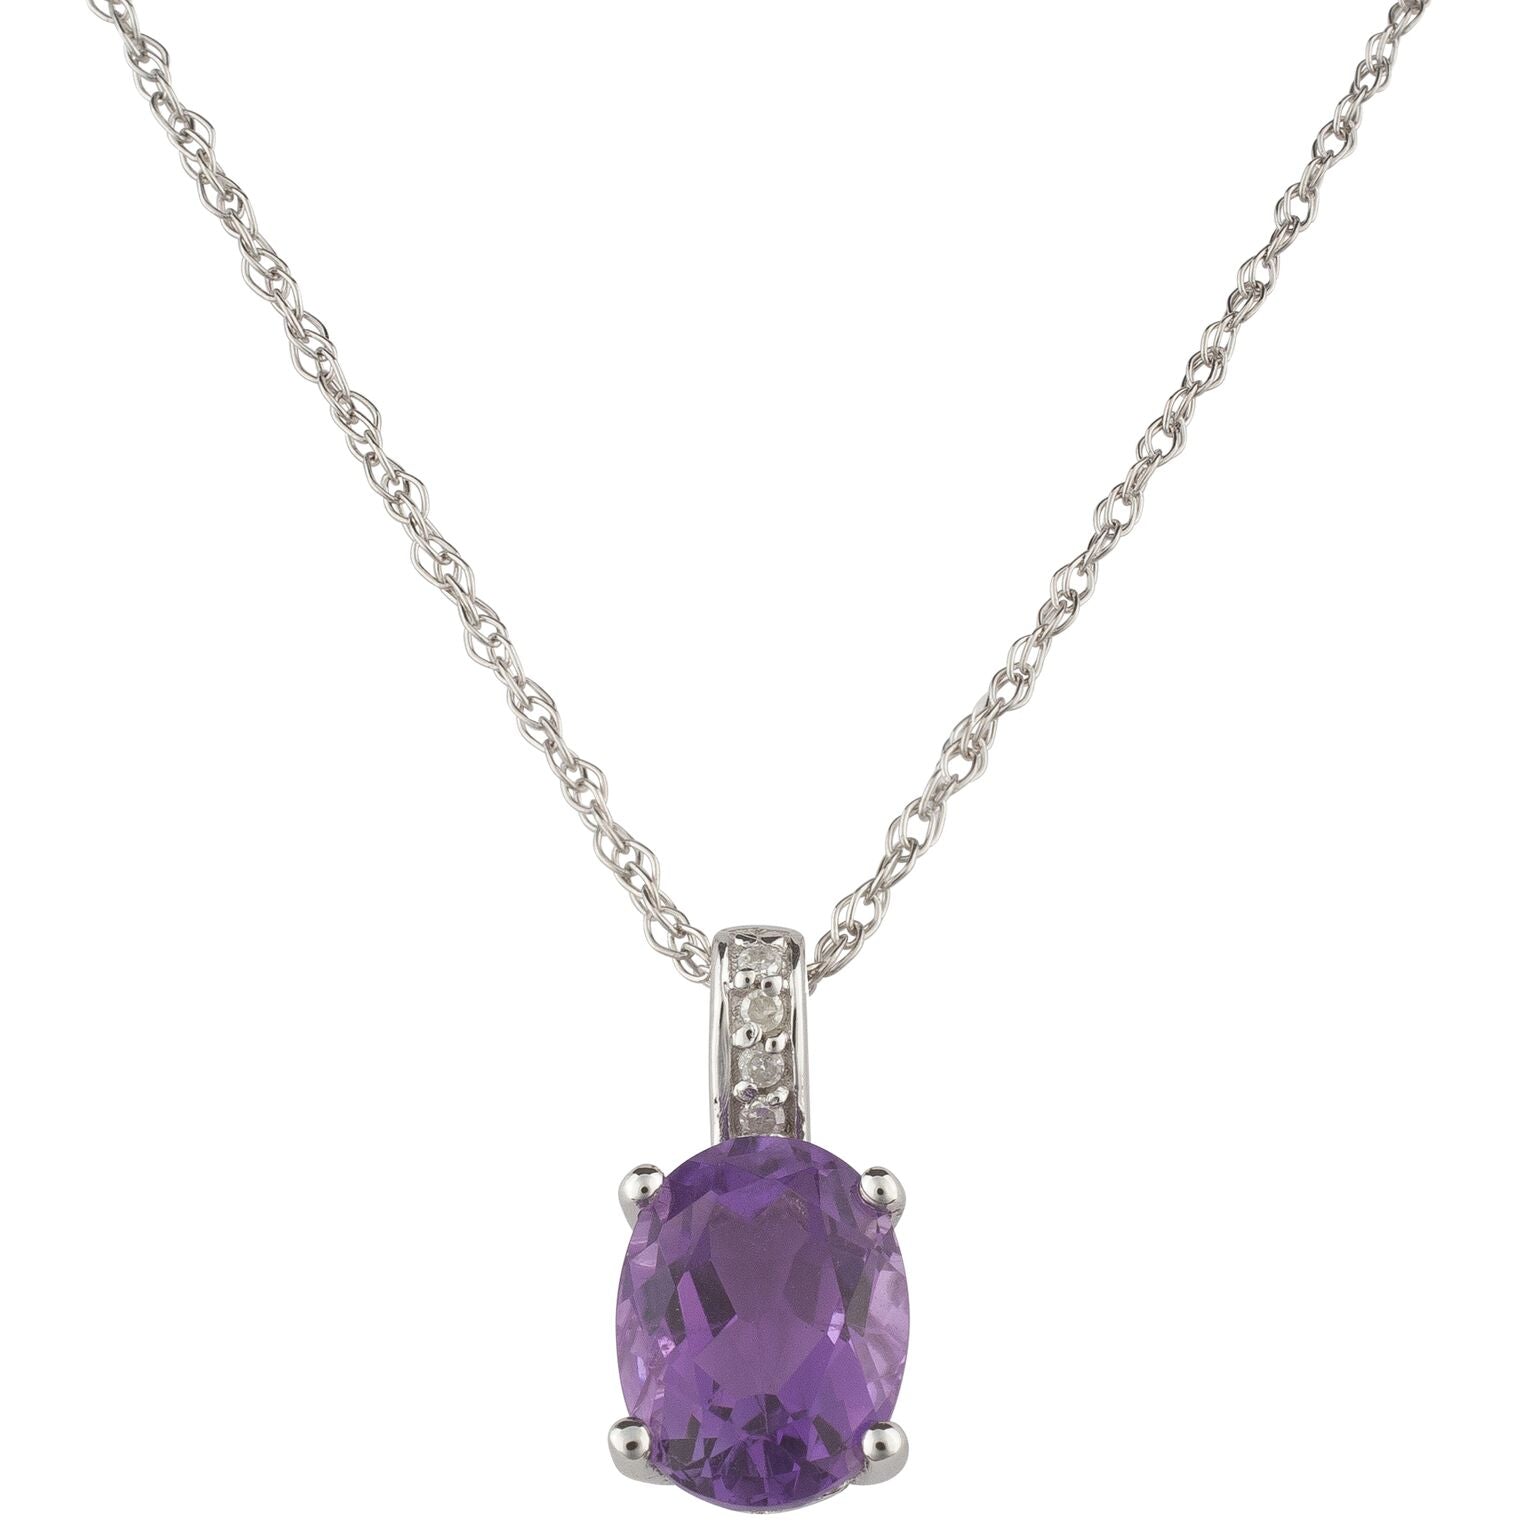 Classic Amethyst Necklace - Colored Stone Necklace